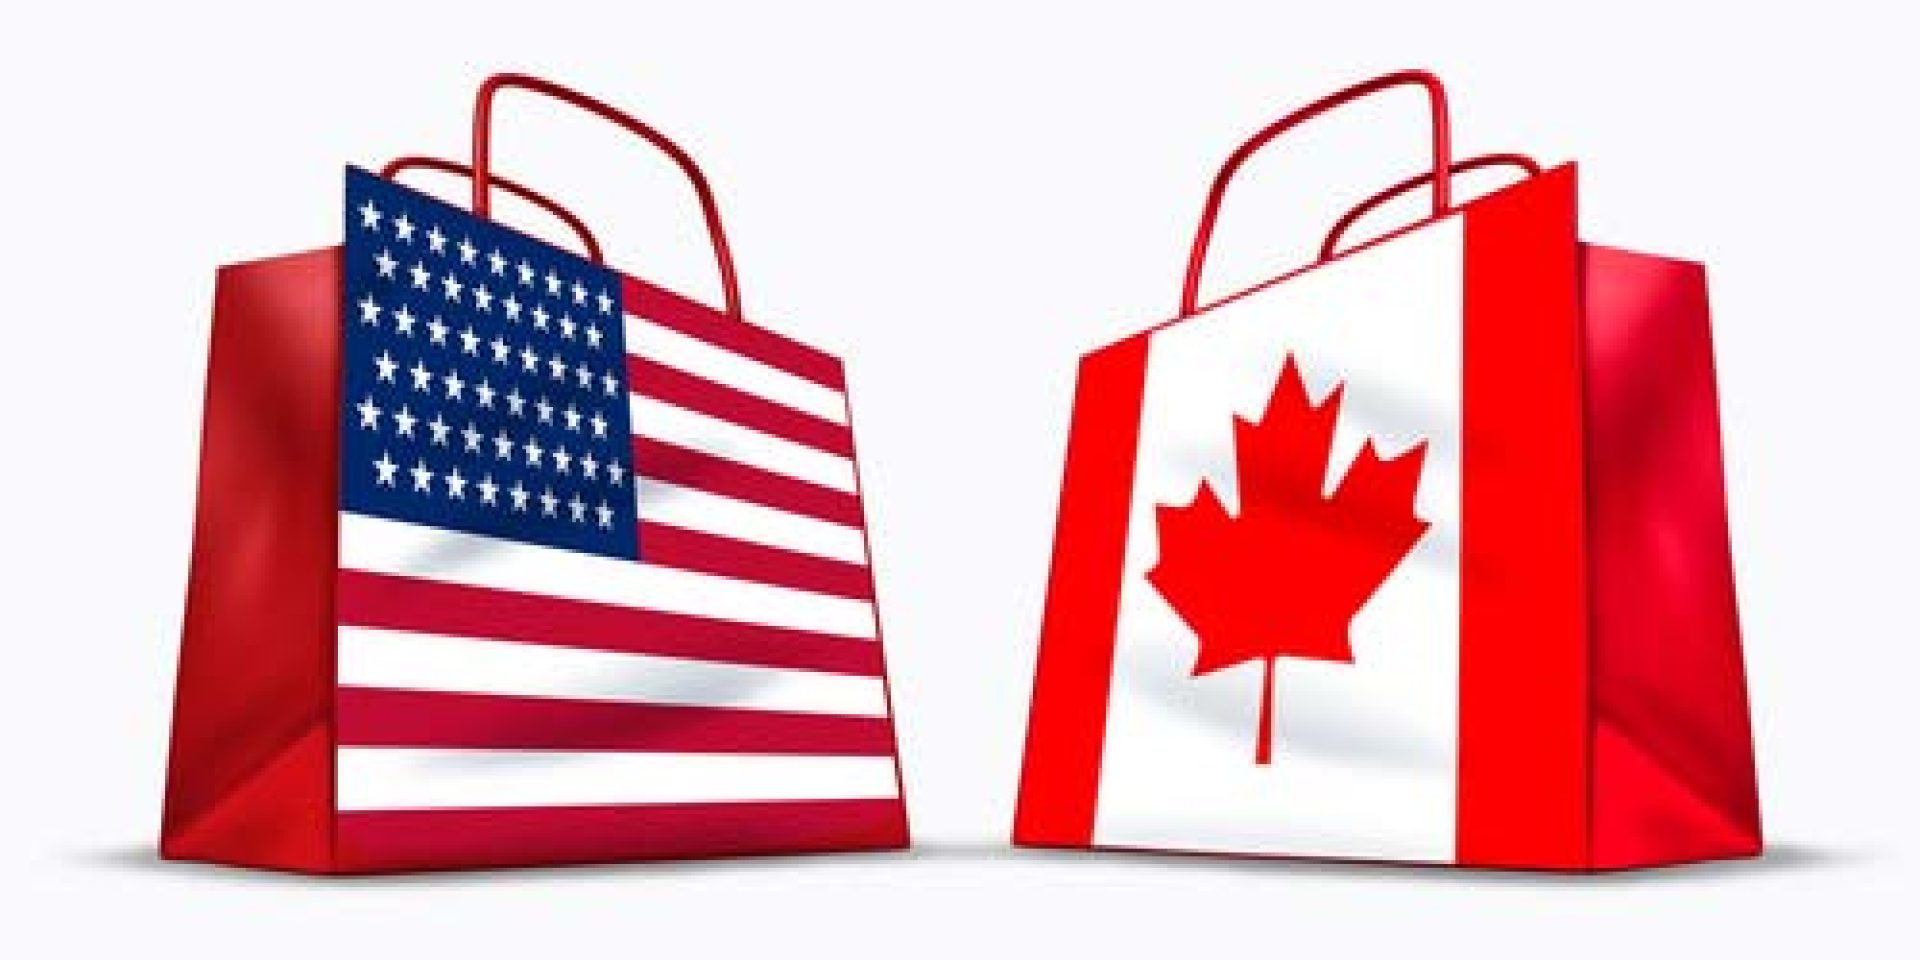 U.S.A. and Canada trade symbol represented by two red shopping bags with the American and Canadian flag with stars and stripes and the maple leaf symbol showing